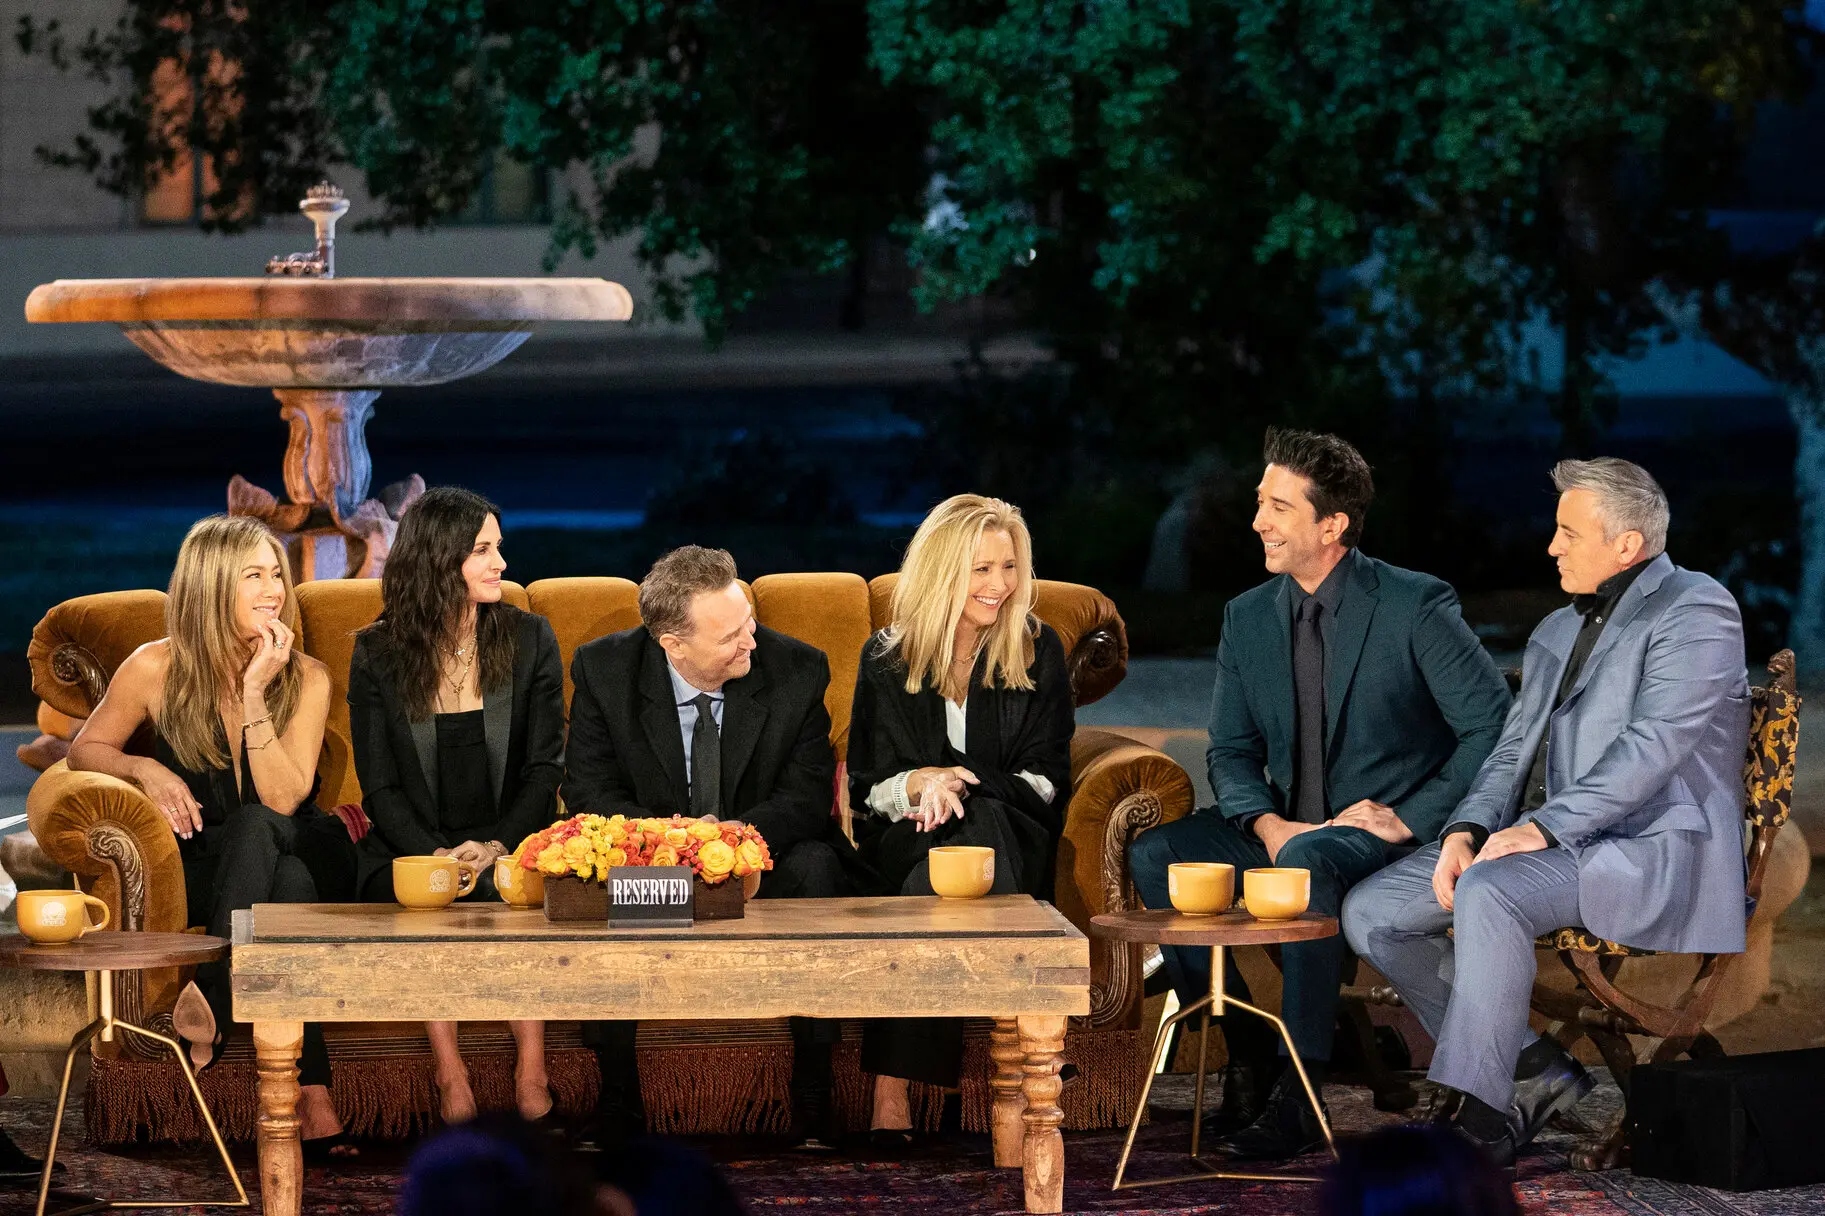 Friends Reunion HBO Max